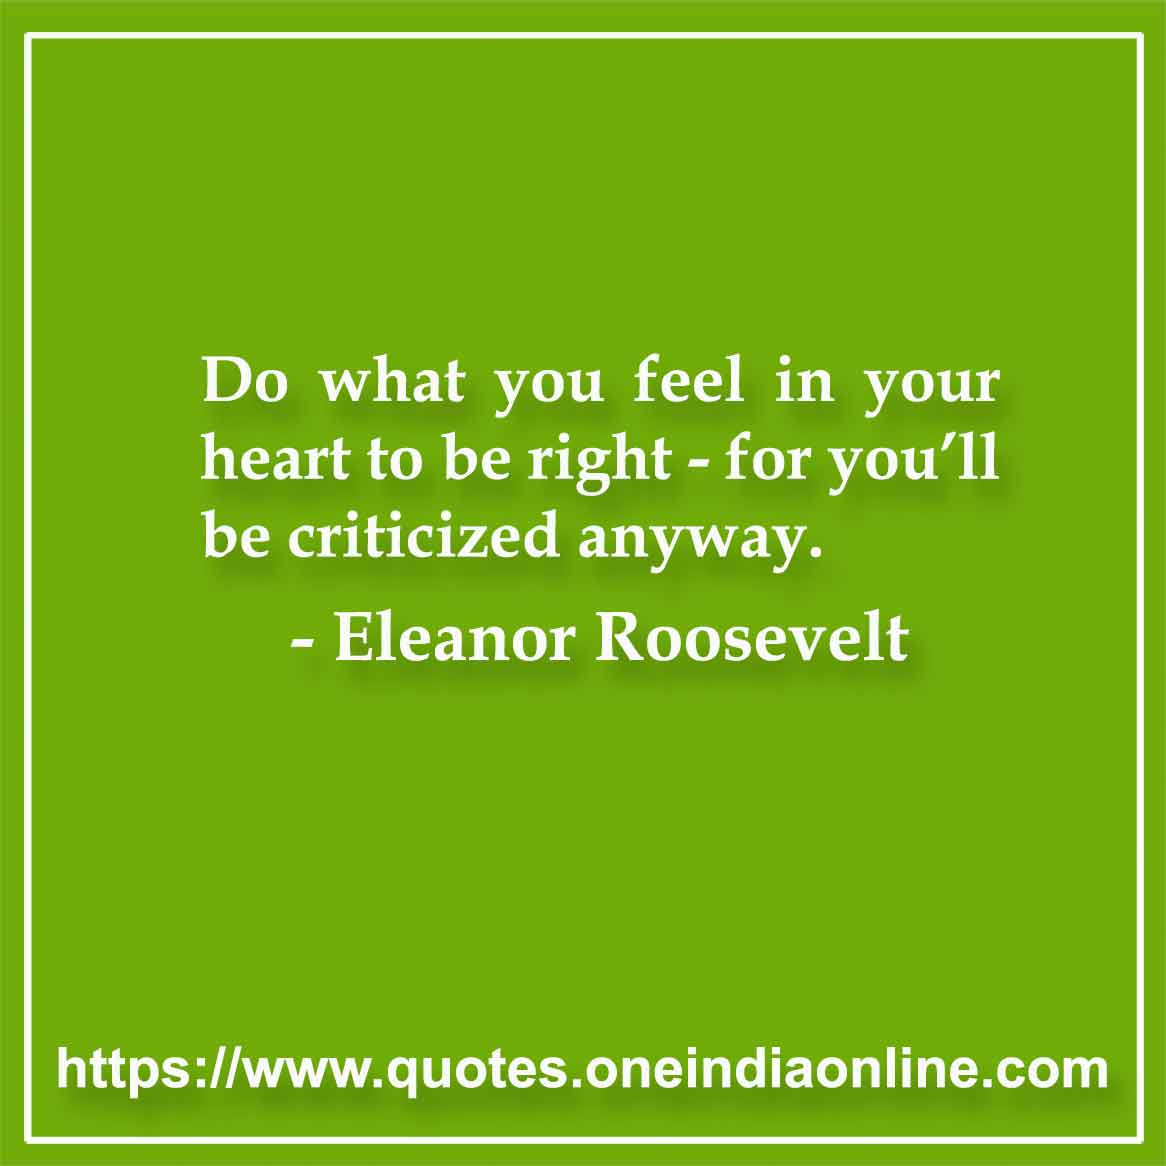 Do what you feel in your heart to be right - for you’ll be criticized anyway.

- Eleanor Roosevelt